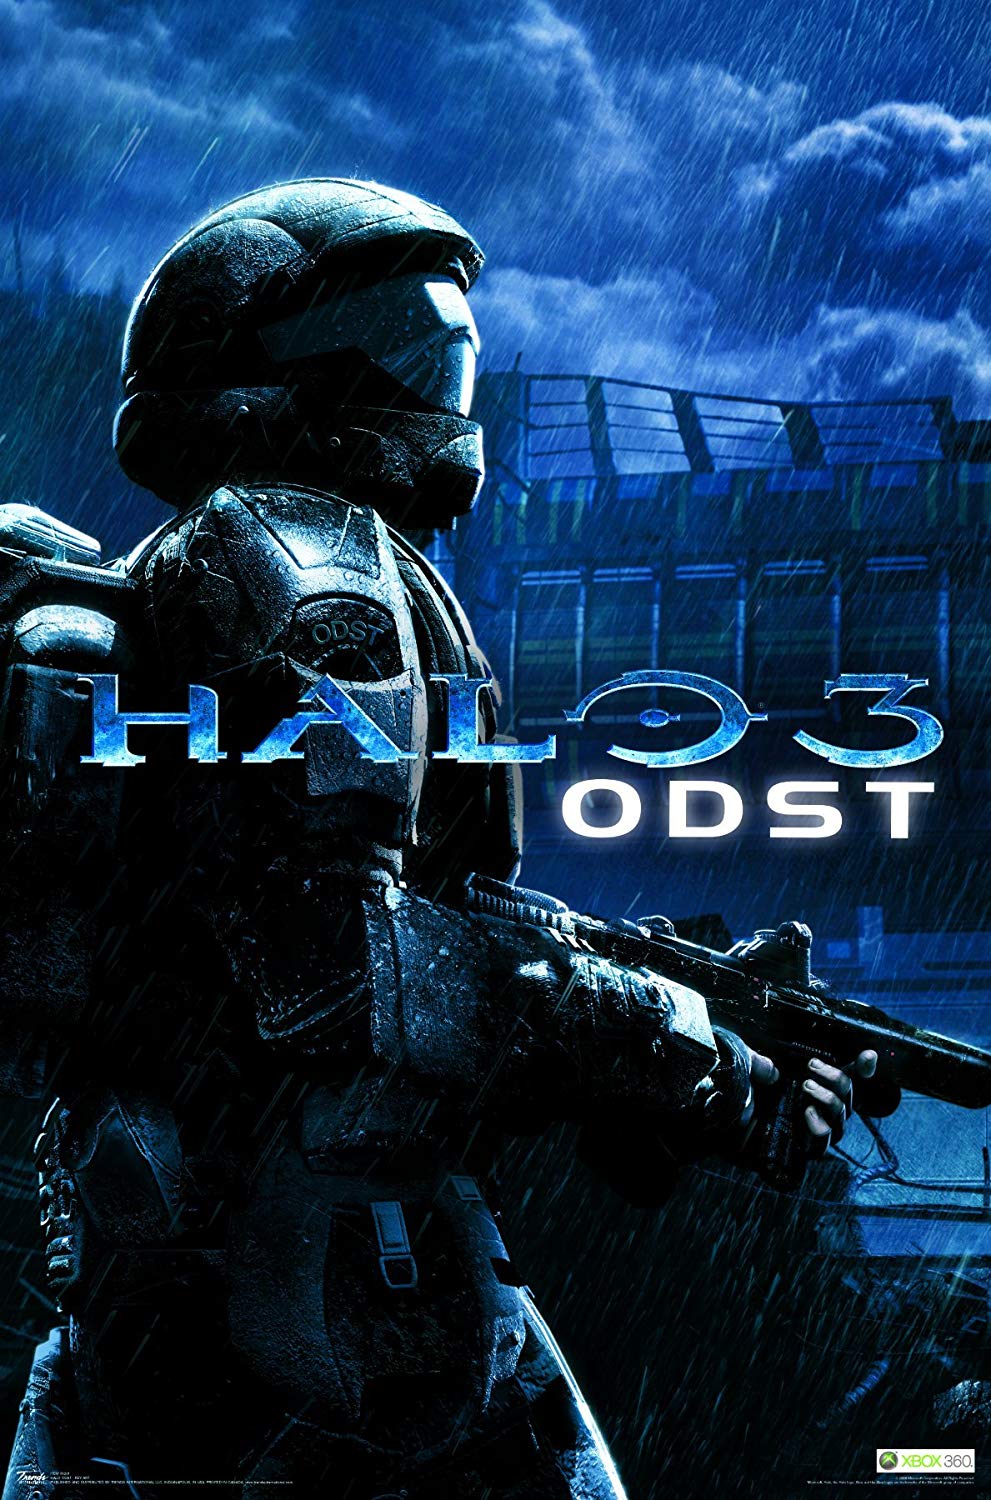 Blue and White ODST Logo - Halo 3: ODST (Video Game 2009)